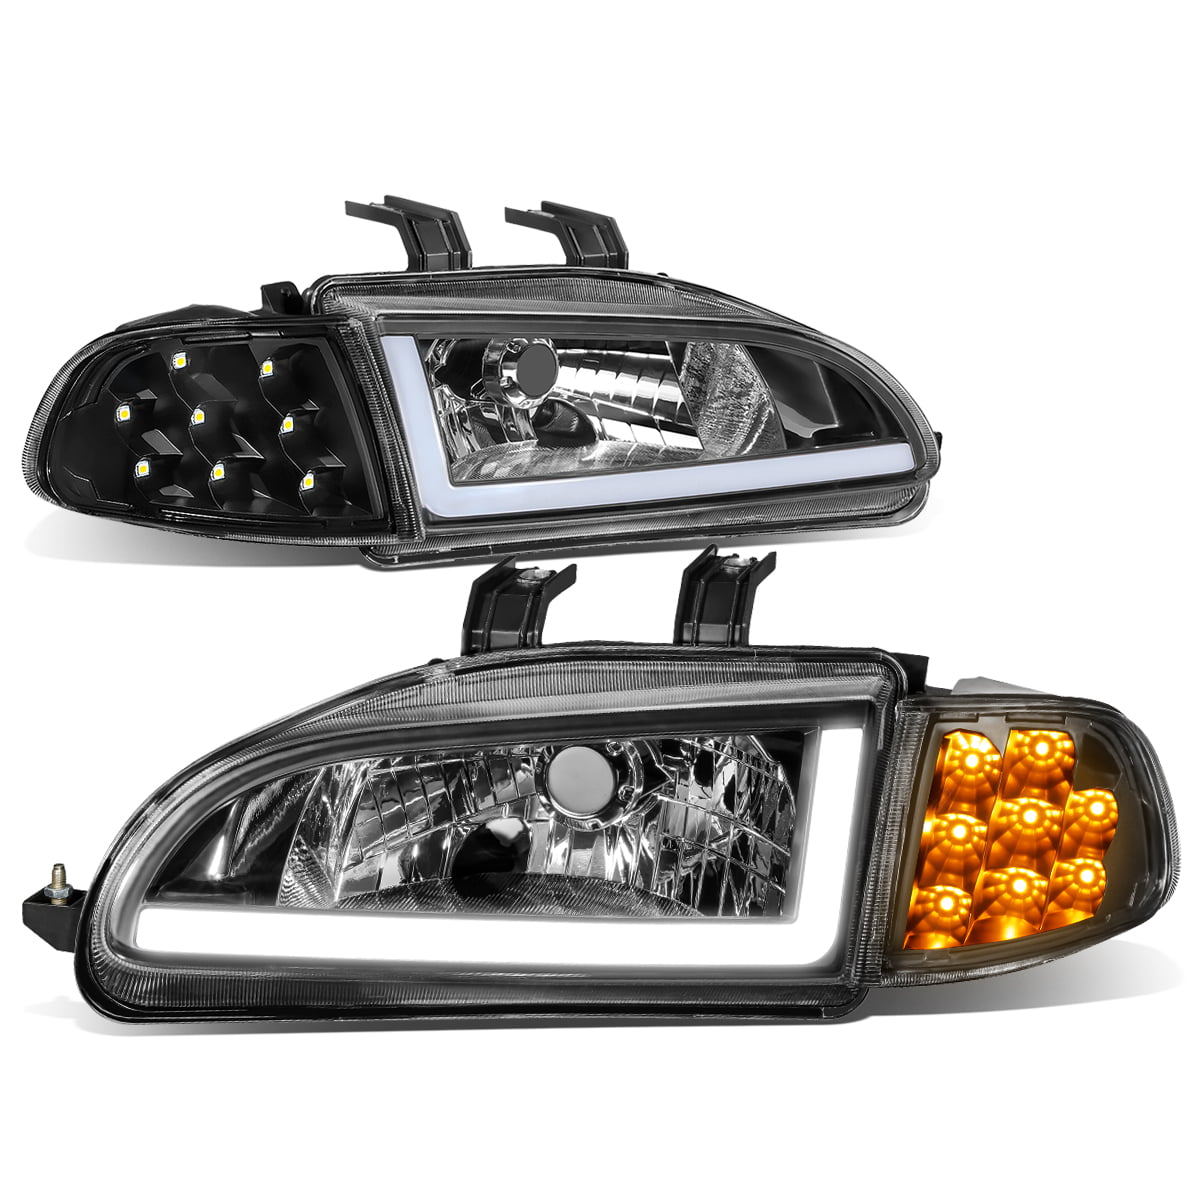 Smoked Lens Front Bumper Fog Light Lamp w/Switch for 92-95 Civic Coupe/Hatchback